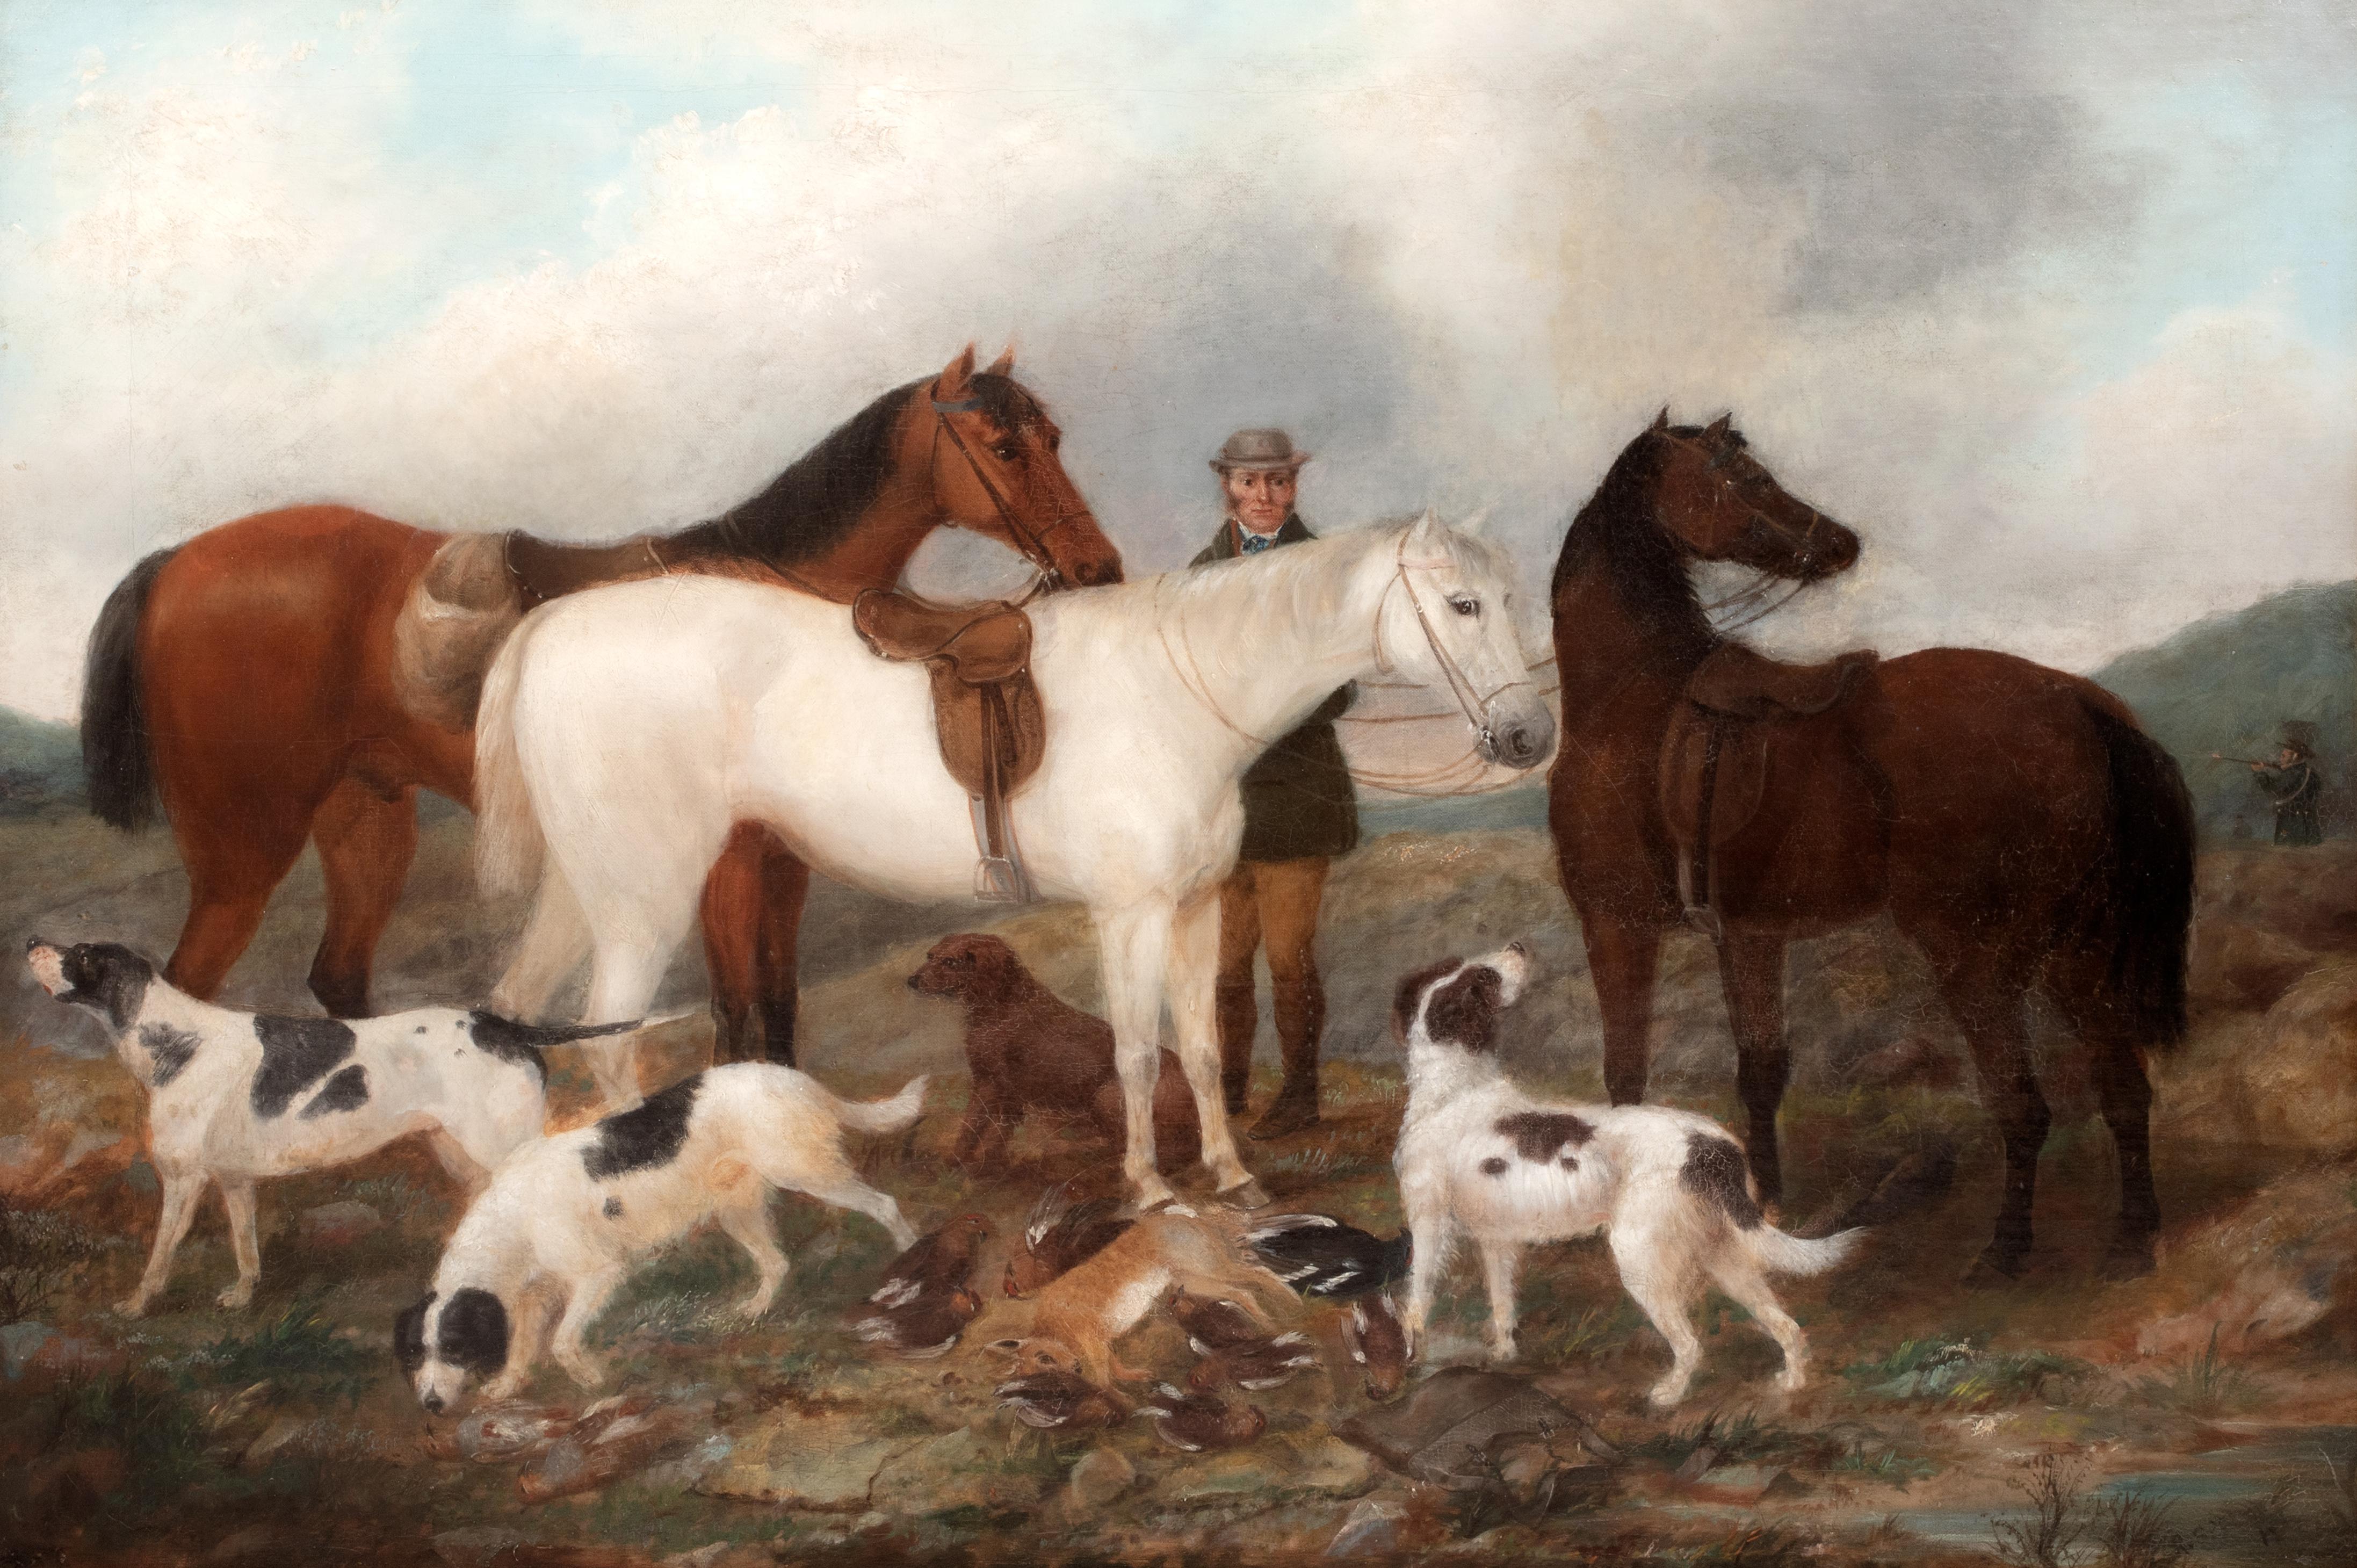 The Hunting Party, Scottish Moors, 19th Century 

by ROBERT CLEMINSON (1844-1902) similar to $15,000

Large 19th century Scottish Moors Hunting Party, oil on canvas by Robert Cleminson. Excellent quality and condition example of the prolific